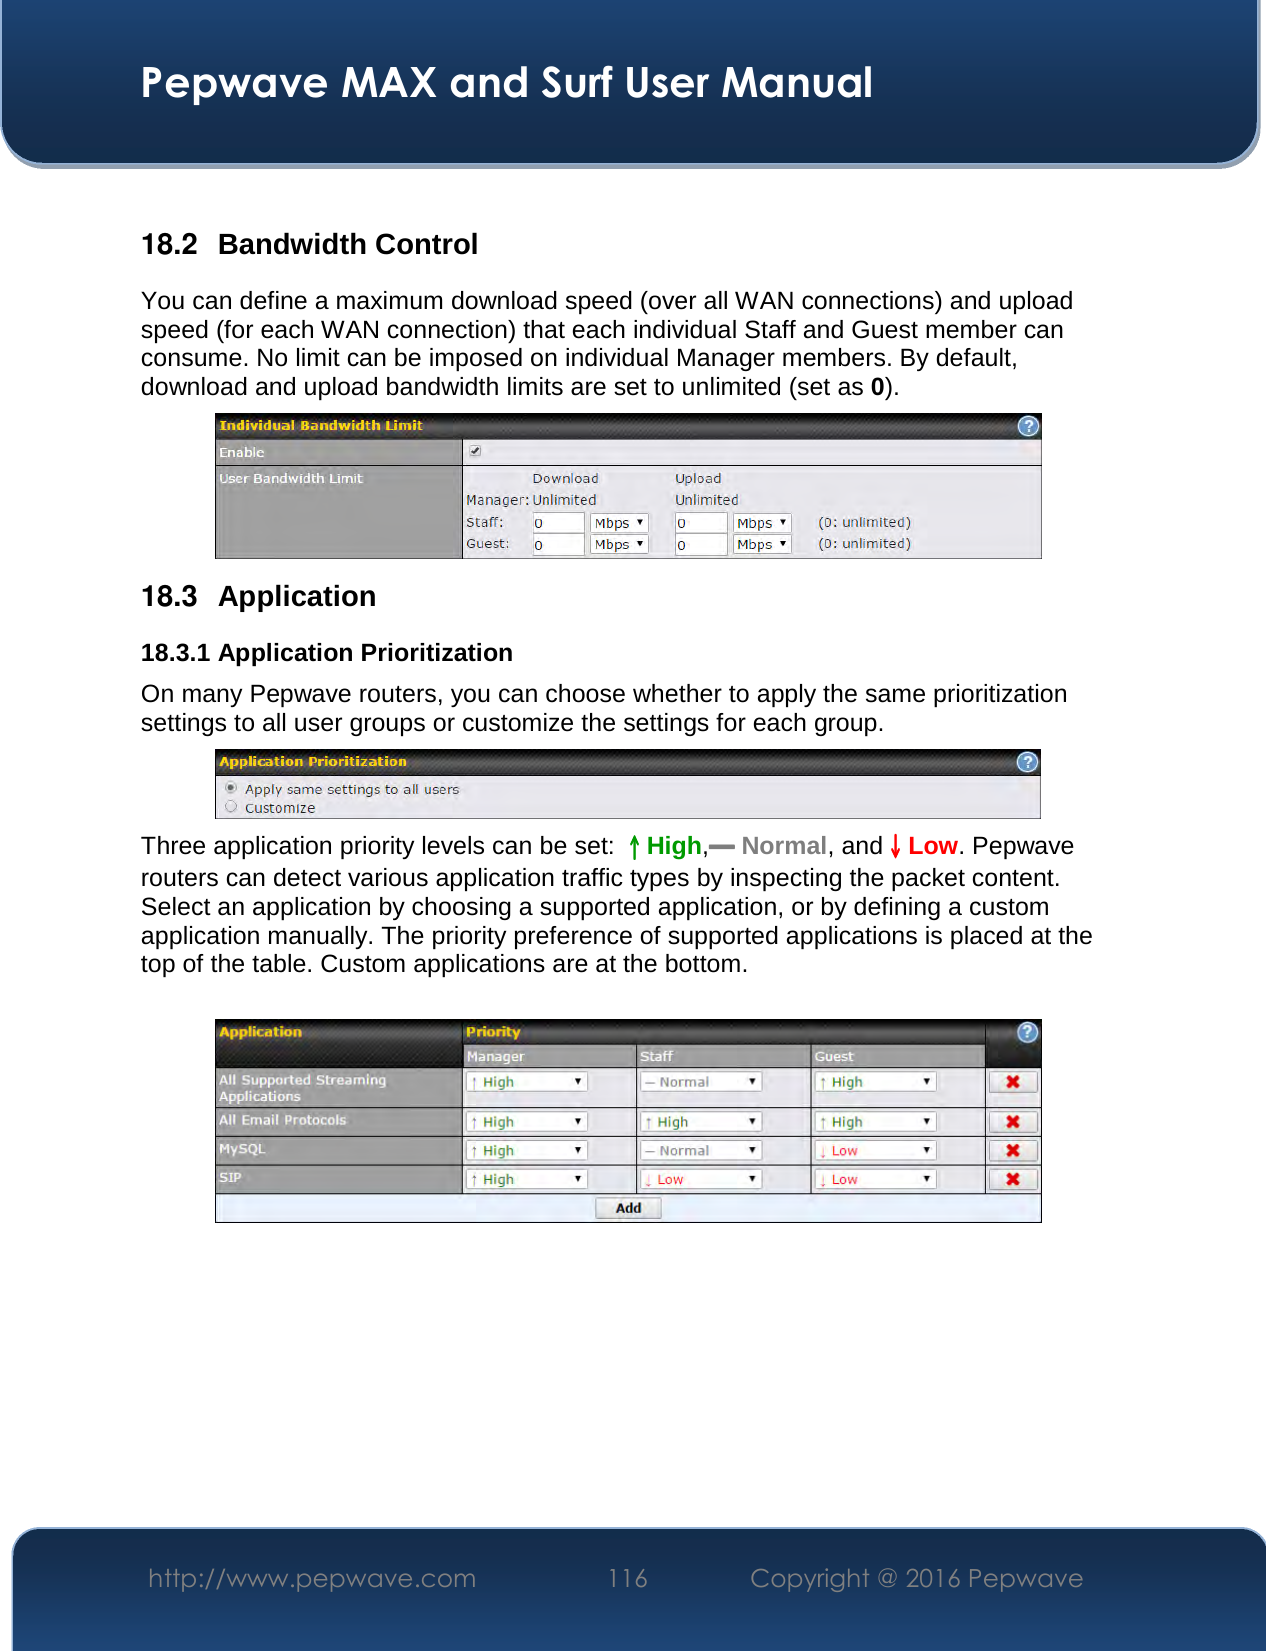  Pepwave MAX and Surf User Manual http://www.pepwave.com  116    Copyright @ 2016 Pepwave    18.2  Bandwidth Control You can define a maximum download speed (over all WAN connections) and upload speed (for each WAN connection) that each individual Staff and Guest member can consume. No limit can be imposed on individual Manager members. By default, download and upload bandwidth limits are set to unlimited (set as 0).  18.3  Application 18.3.1 Application Prioritization On many Pepwave routers, you can choose whether to apply the same prioritization settings to all user groups or customize the settings for each group.   Three application priority levels can be set: ↑↑↑↑High,━━━━ Normal, and↓↓↓↓Low. Pepwave routers can detect various application traffic types by inspecting the packet content. Select an application by choosing a supported application, or by defining a custom application manually. The priority preference of supported applications is placed at the top of the table. Custom applications are at the bottom.       